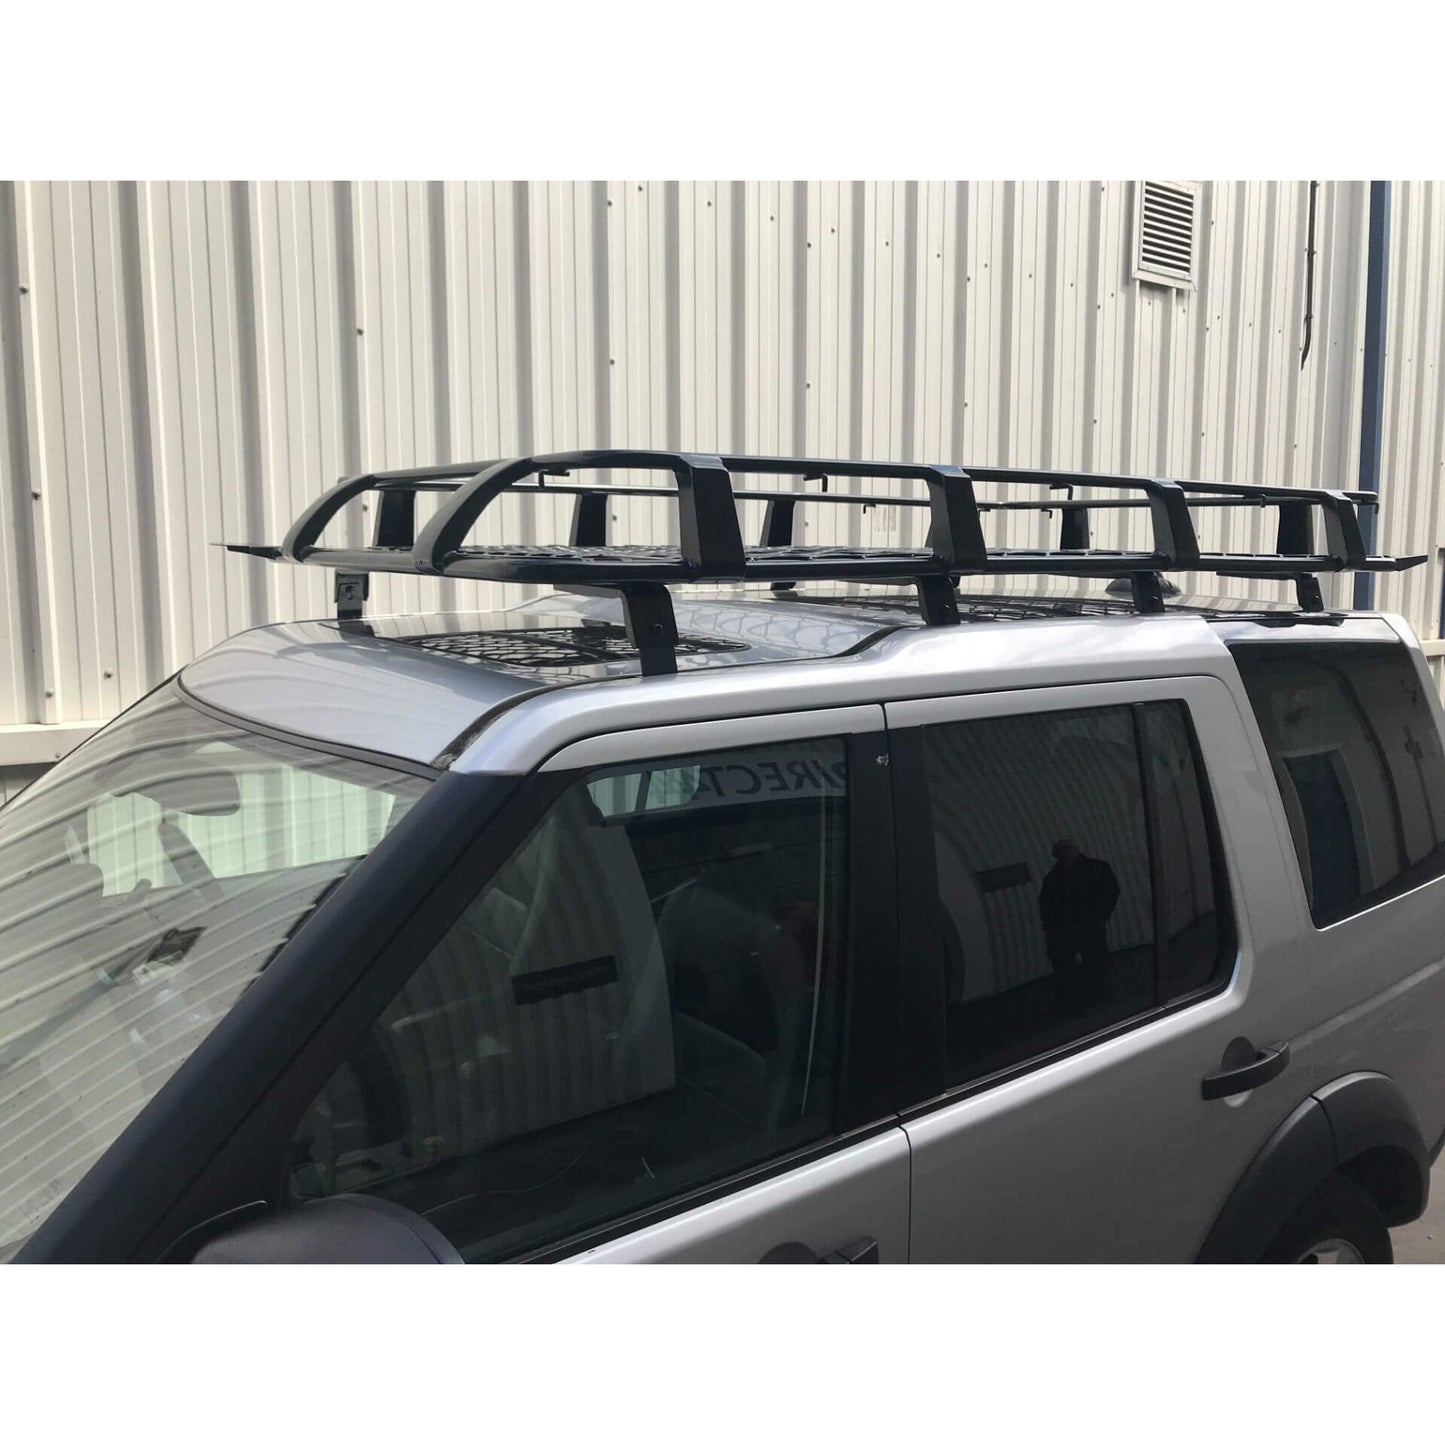 Expedition Aluminium Full Basket Roof Rack for Land Rover Discovery 3 and 4